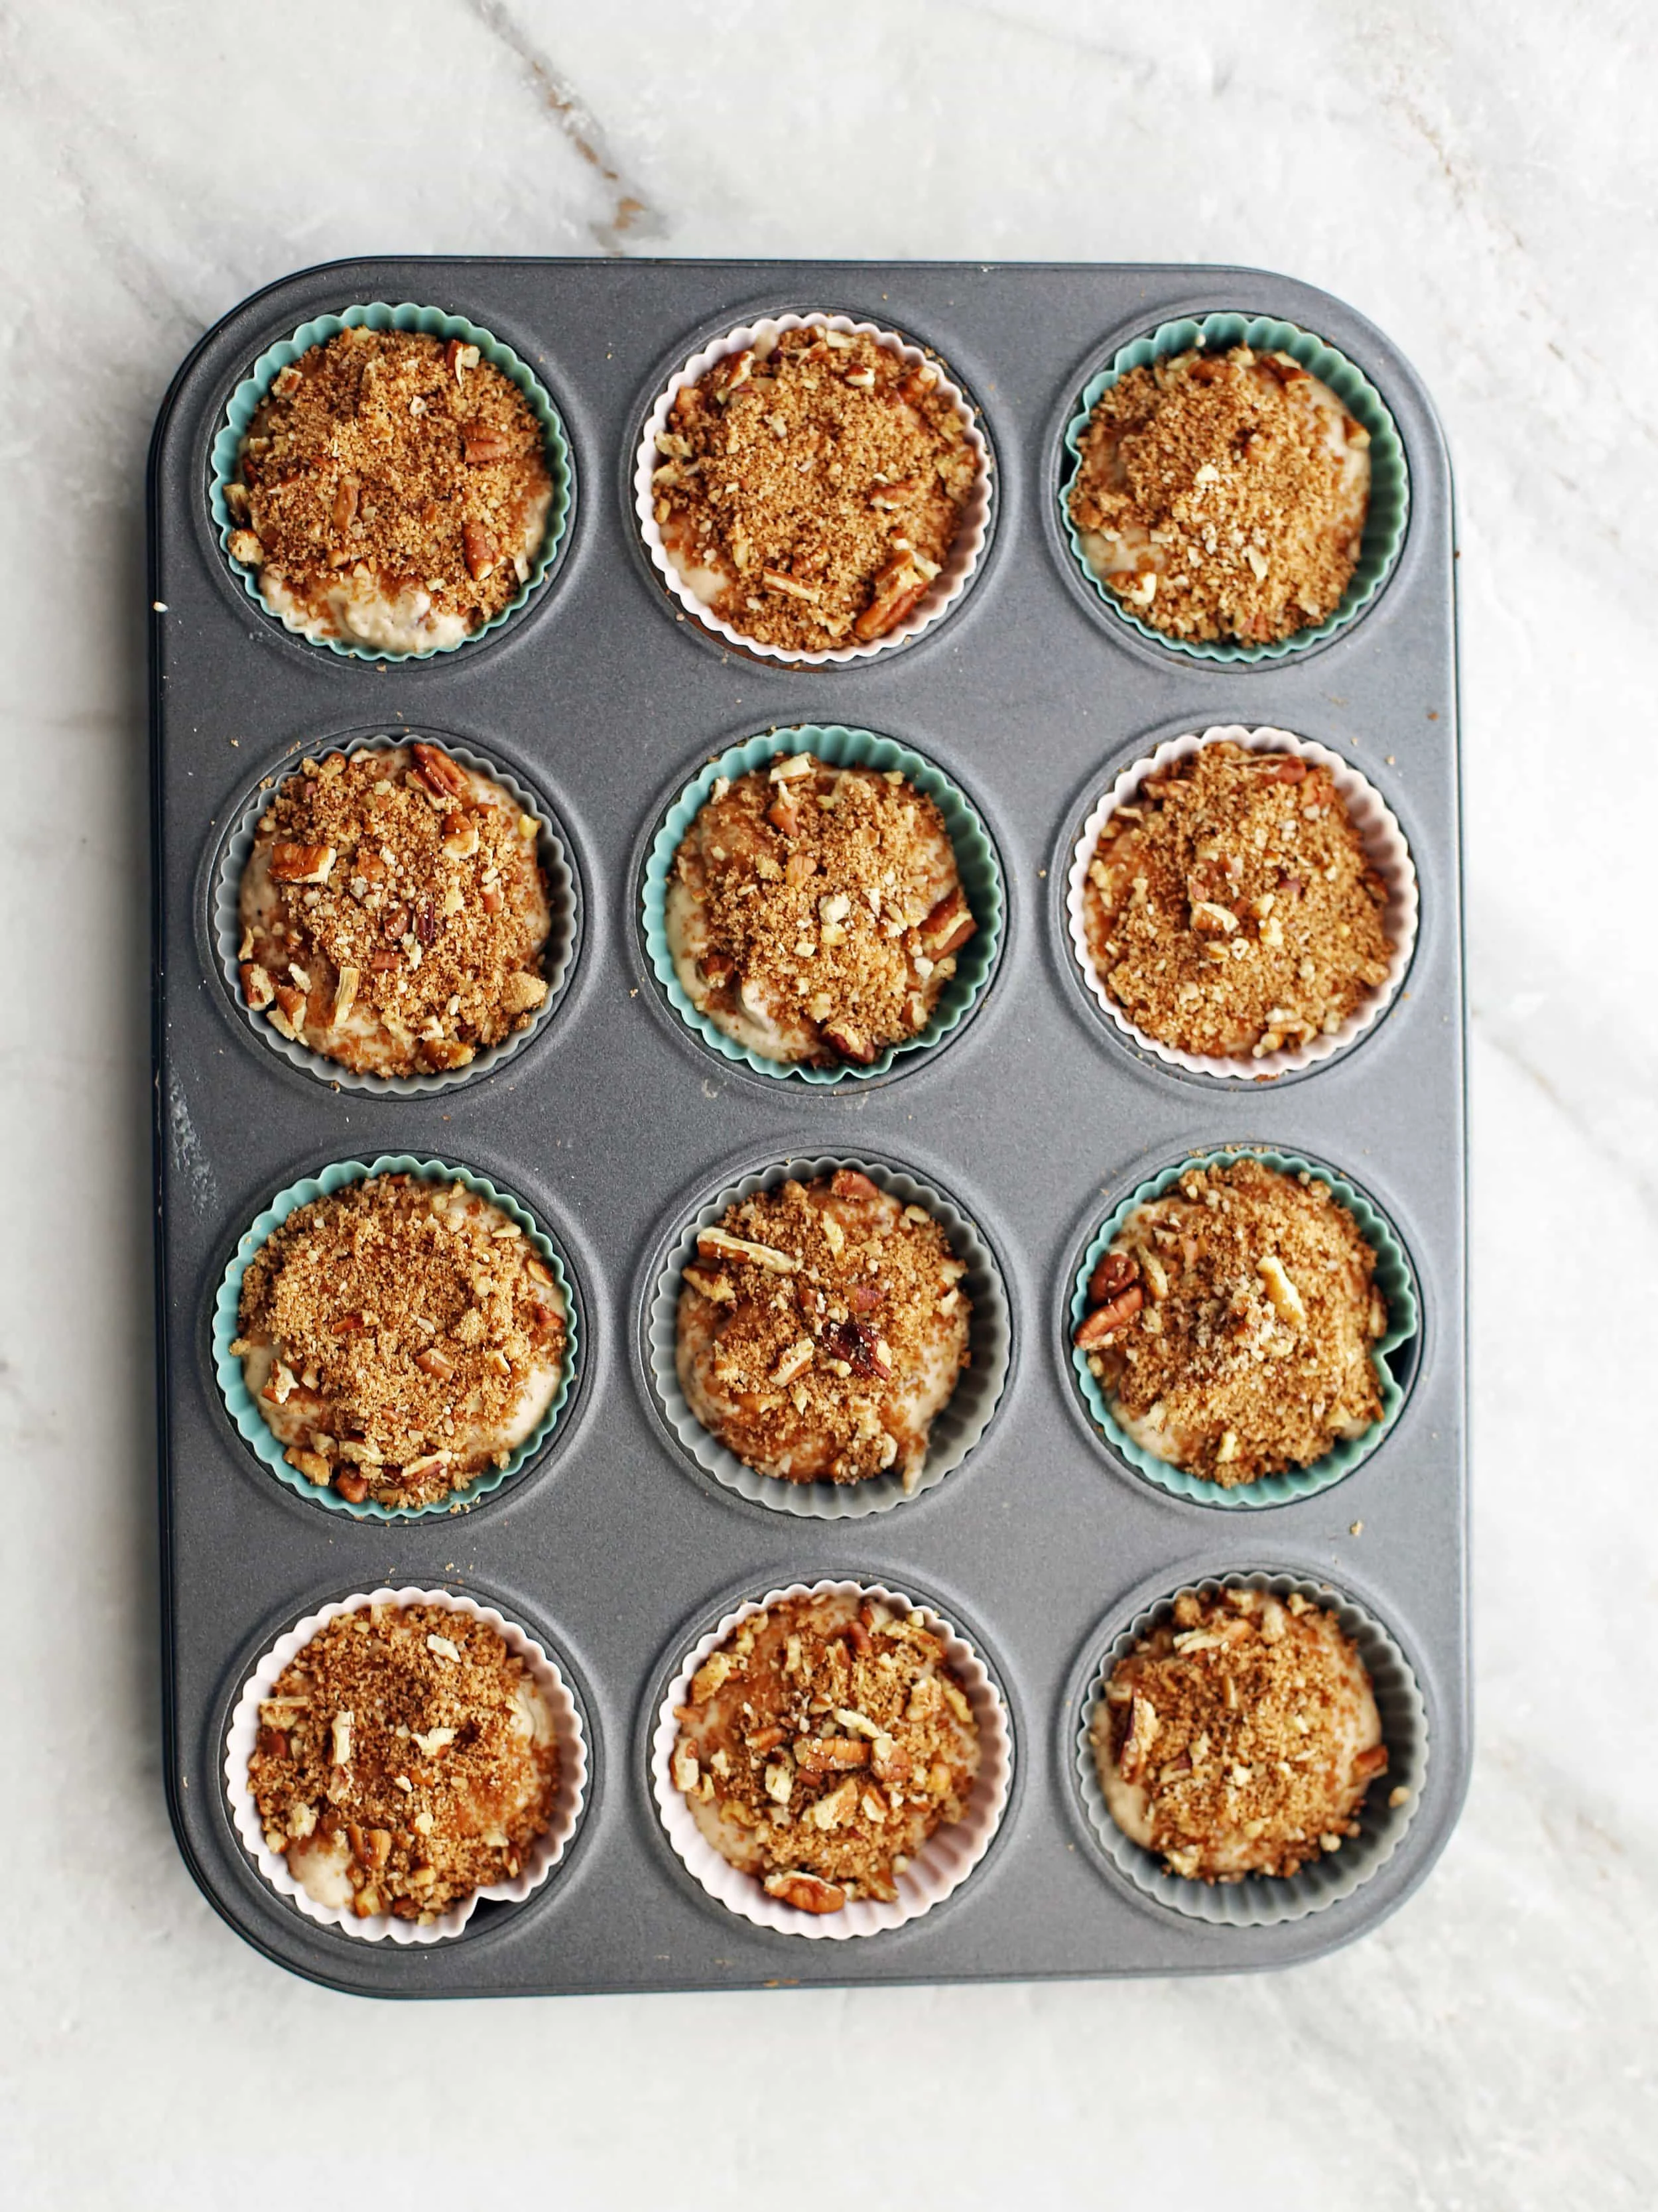 Pre-baked cinnamon pecan applesauce muffins in a muffin baking pan.